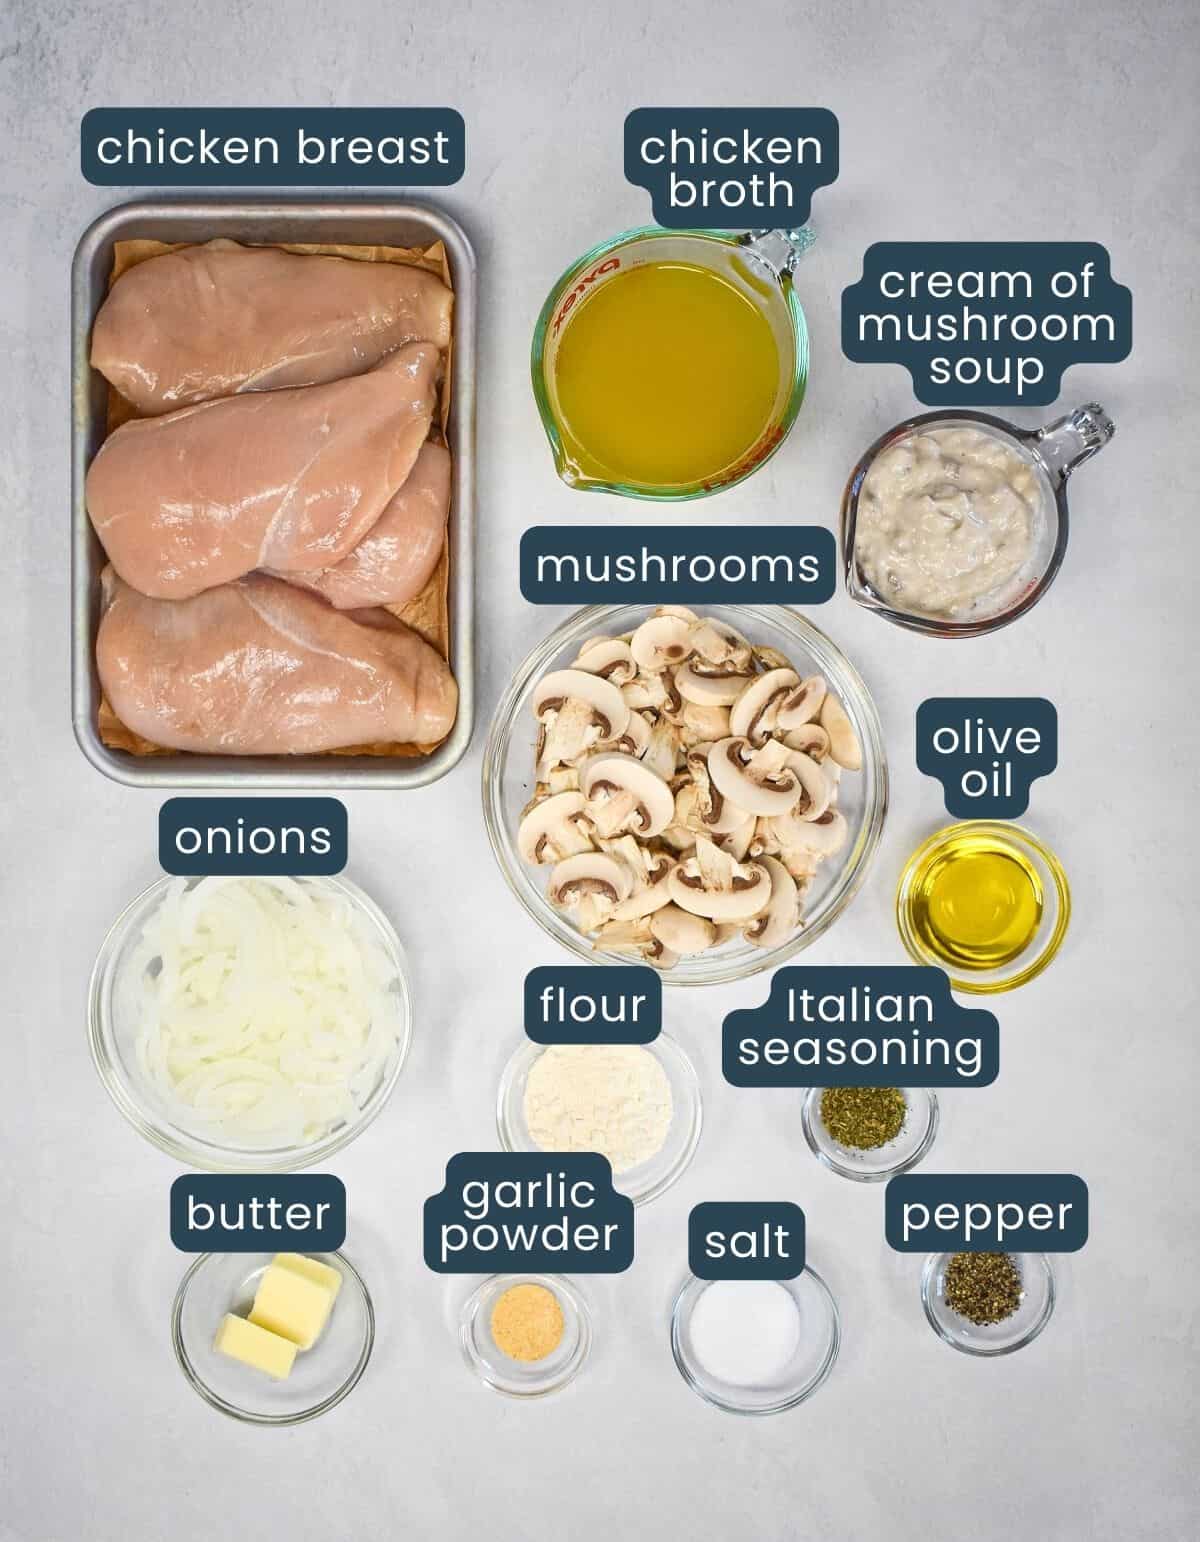 The ingredients for the chicken with cream of mushrooms soup prepped and arranged on a white table with each labeled with the title.